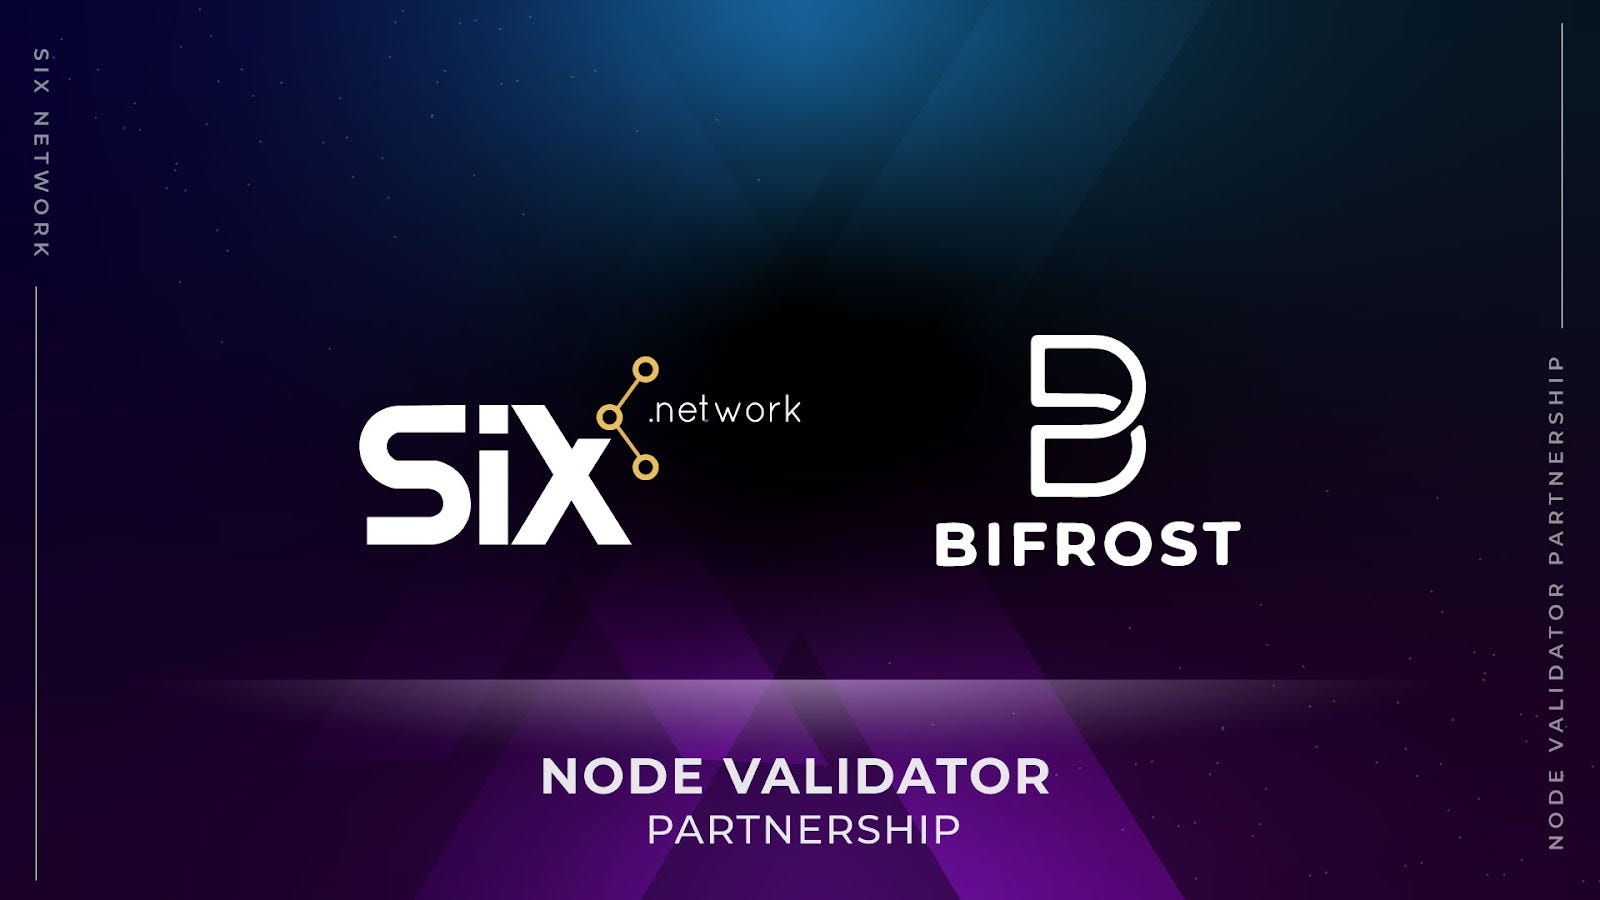 SIX Network and BIFROST Have Partnered as Node Validators for Each Other